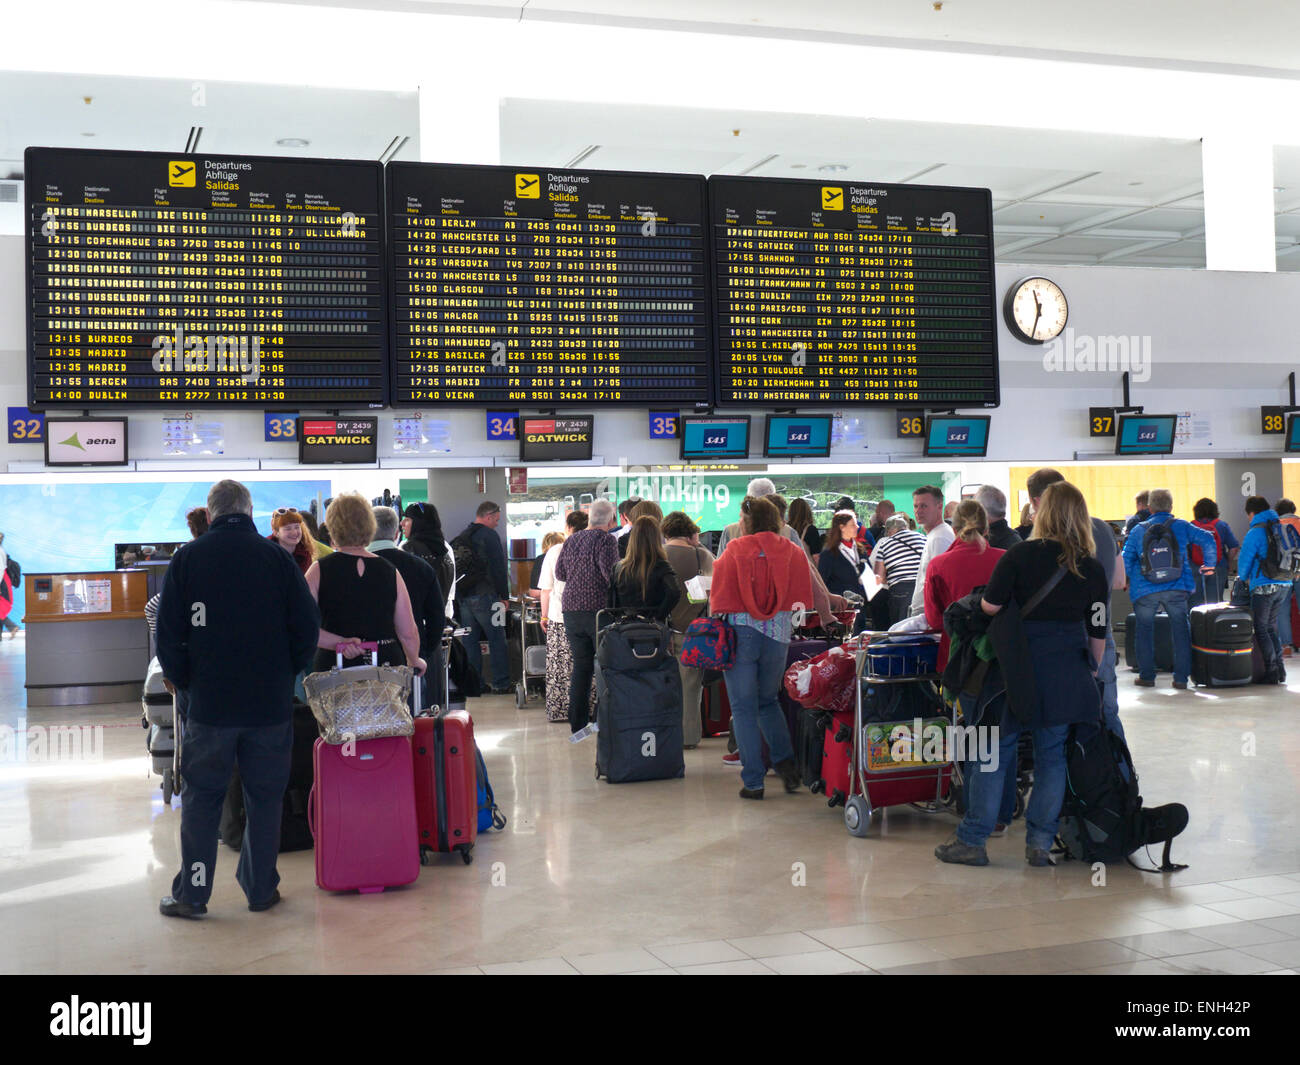 Airport Spain Information screens and queues of airline passengers and luggage wait on airport concourse to check in to their flight Stock Photo